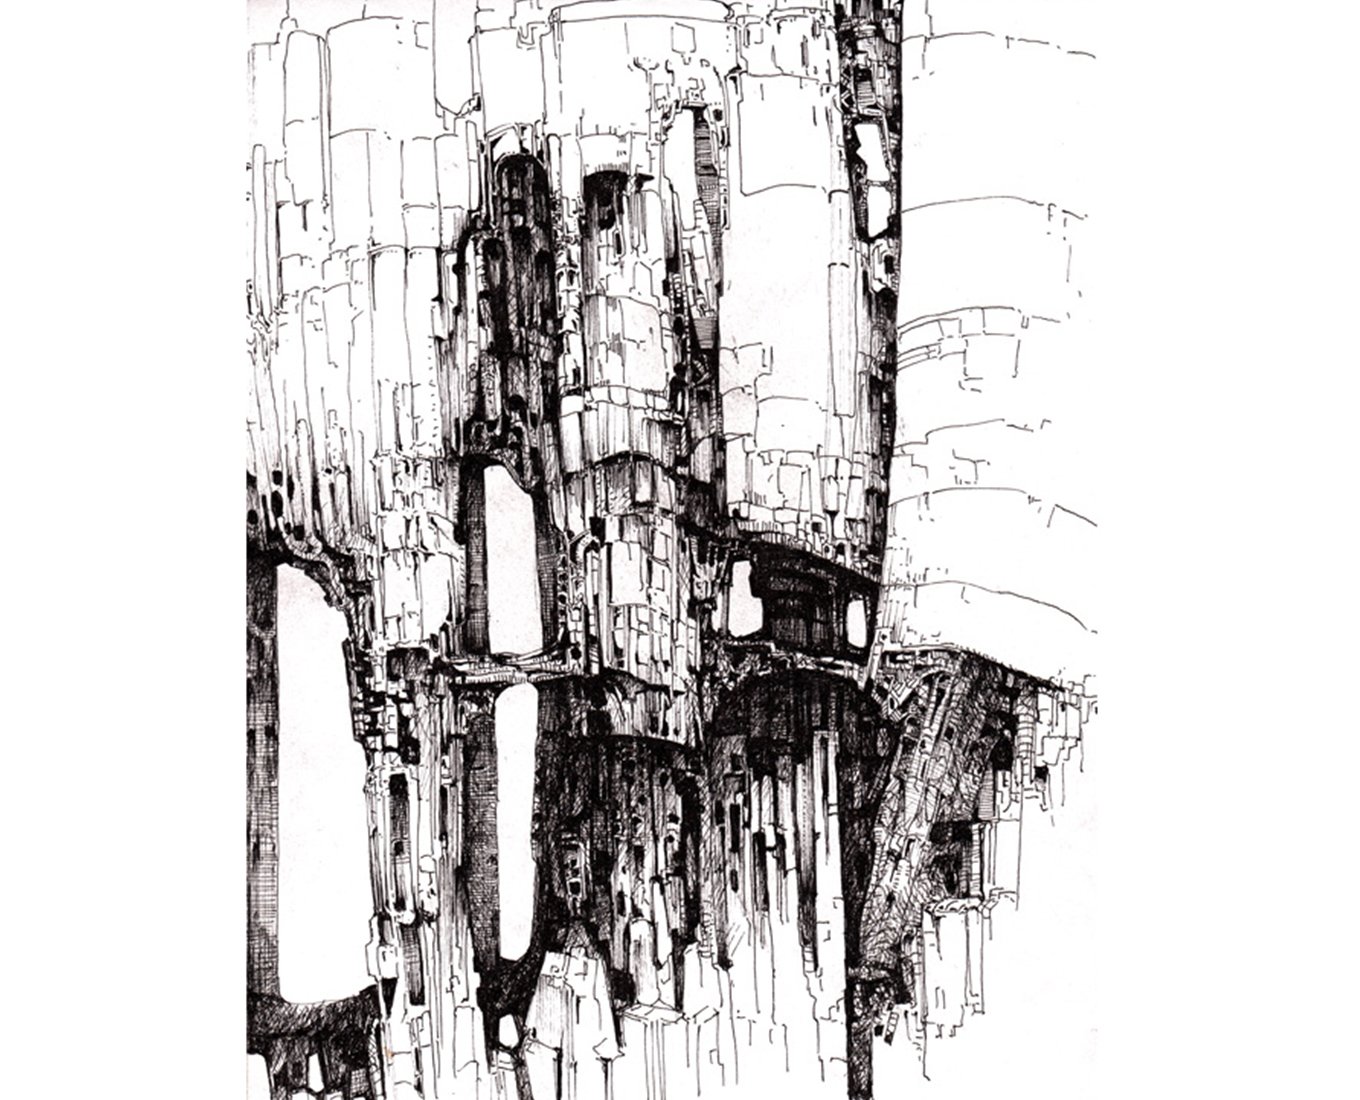 A sketch of a jagged rock formation with gaps in it.